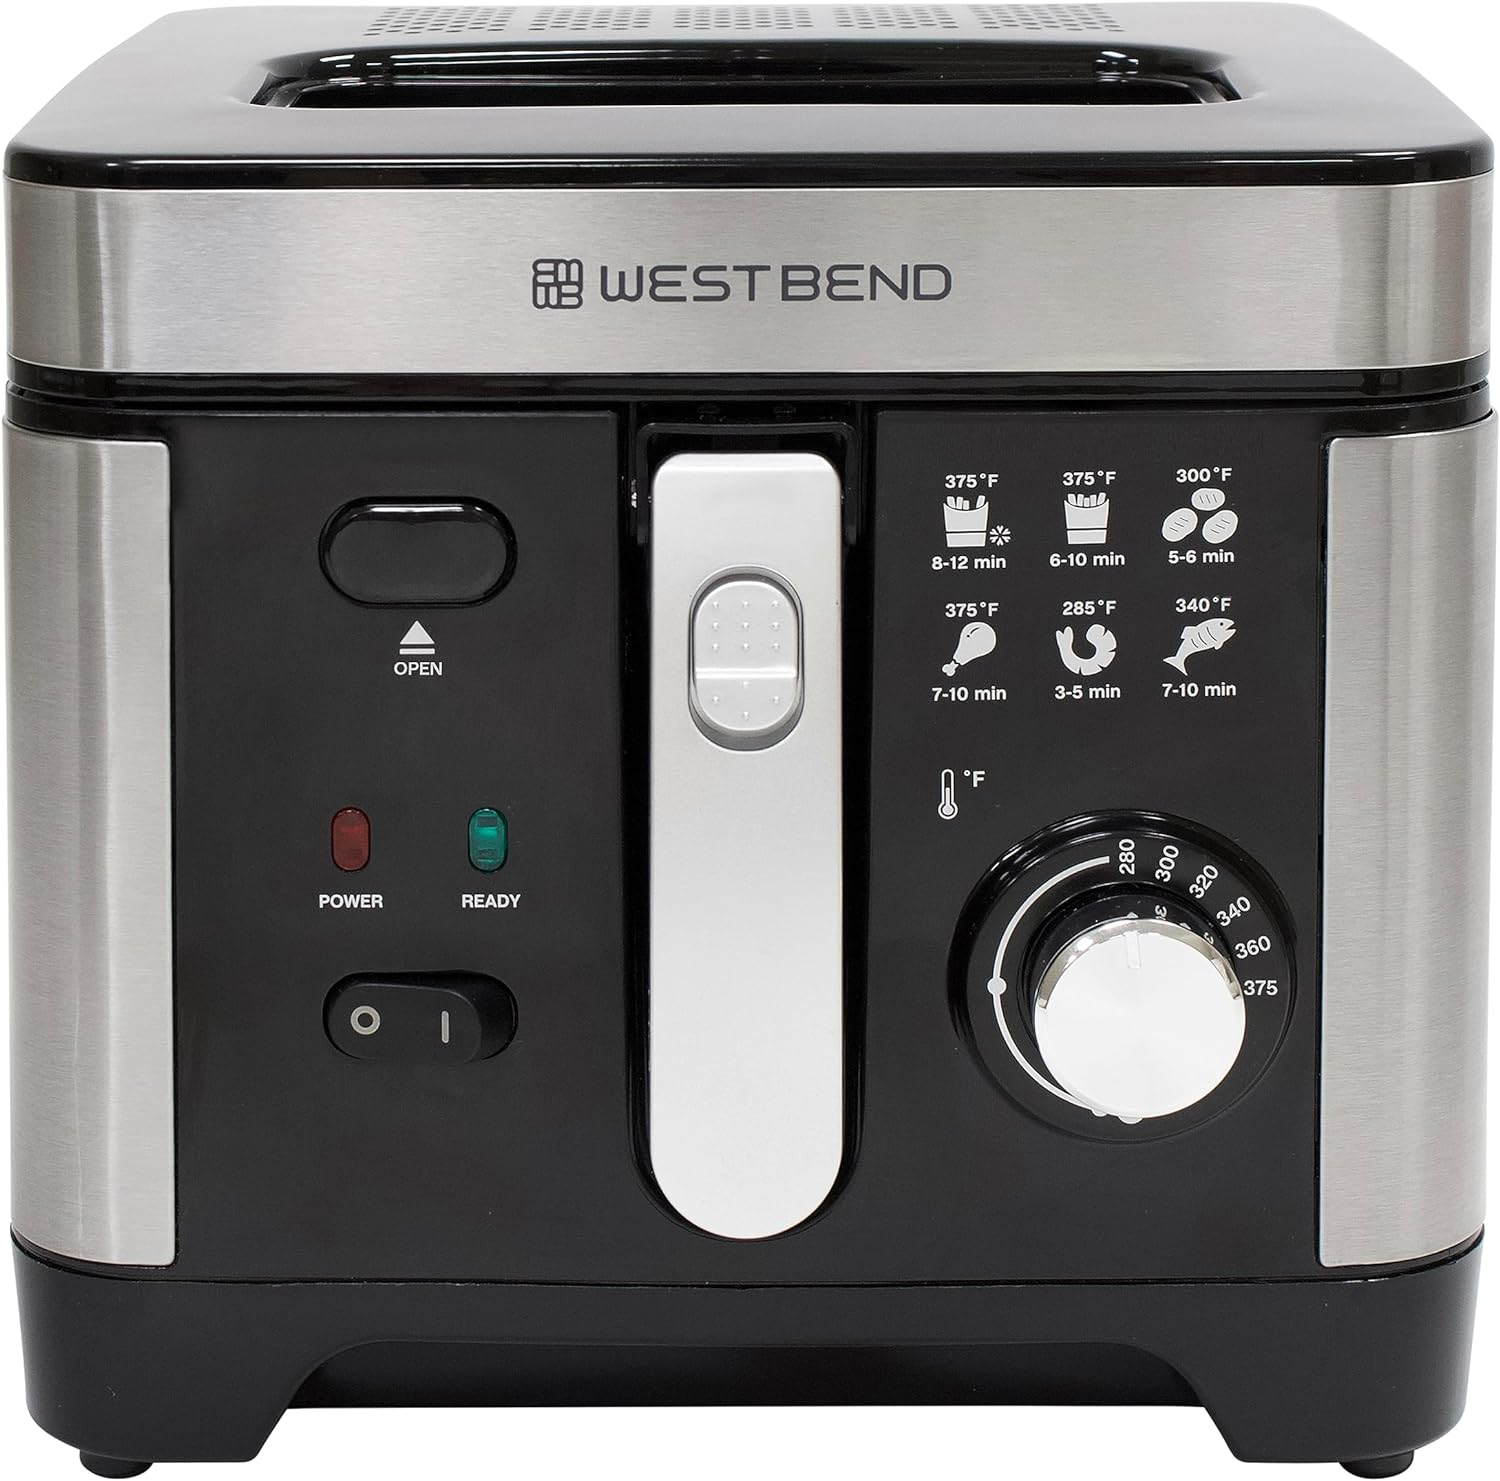 West Bend Deep Fryer with Adjustable Temperature Control Nonstick Basket Easy-View Window and Temperature Guide, Folding Handle and Locking Cover for Easy Storage, 3-Liter, Silver,Black, DFWB3LBK13